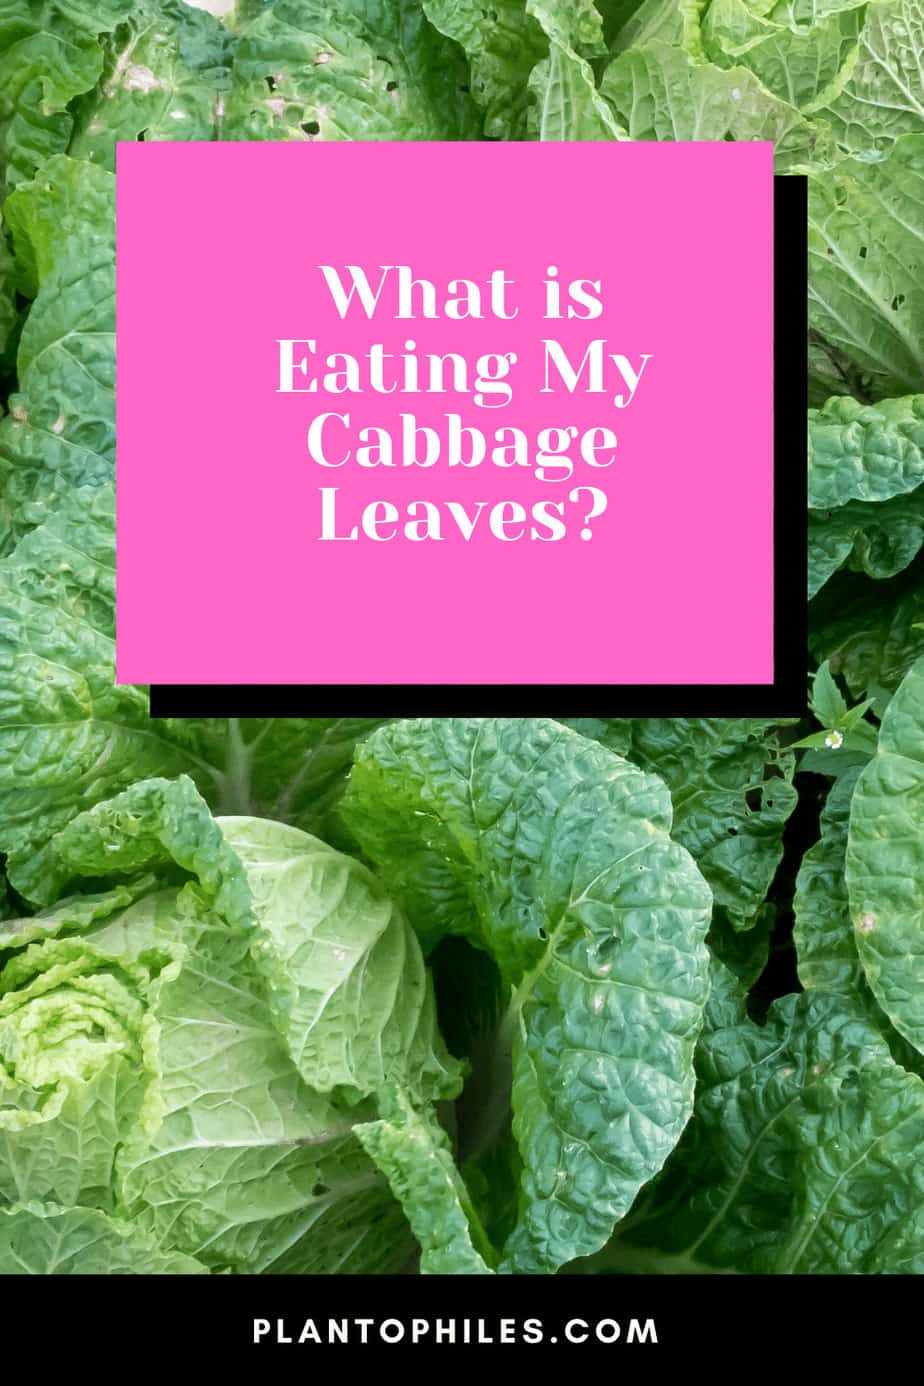 What is Eating My Cabbage Leaves